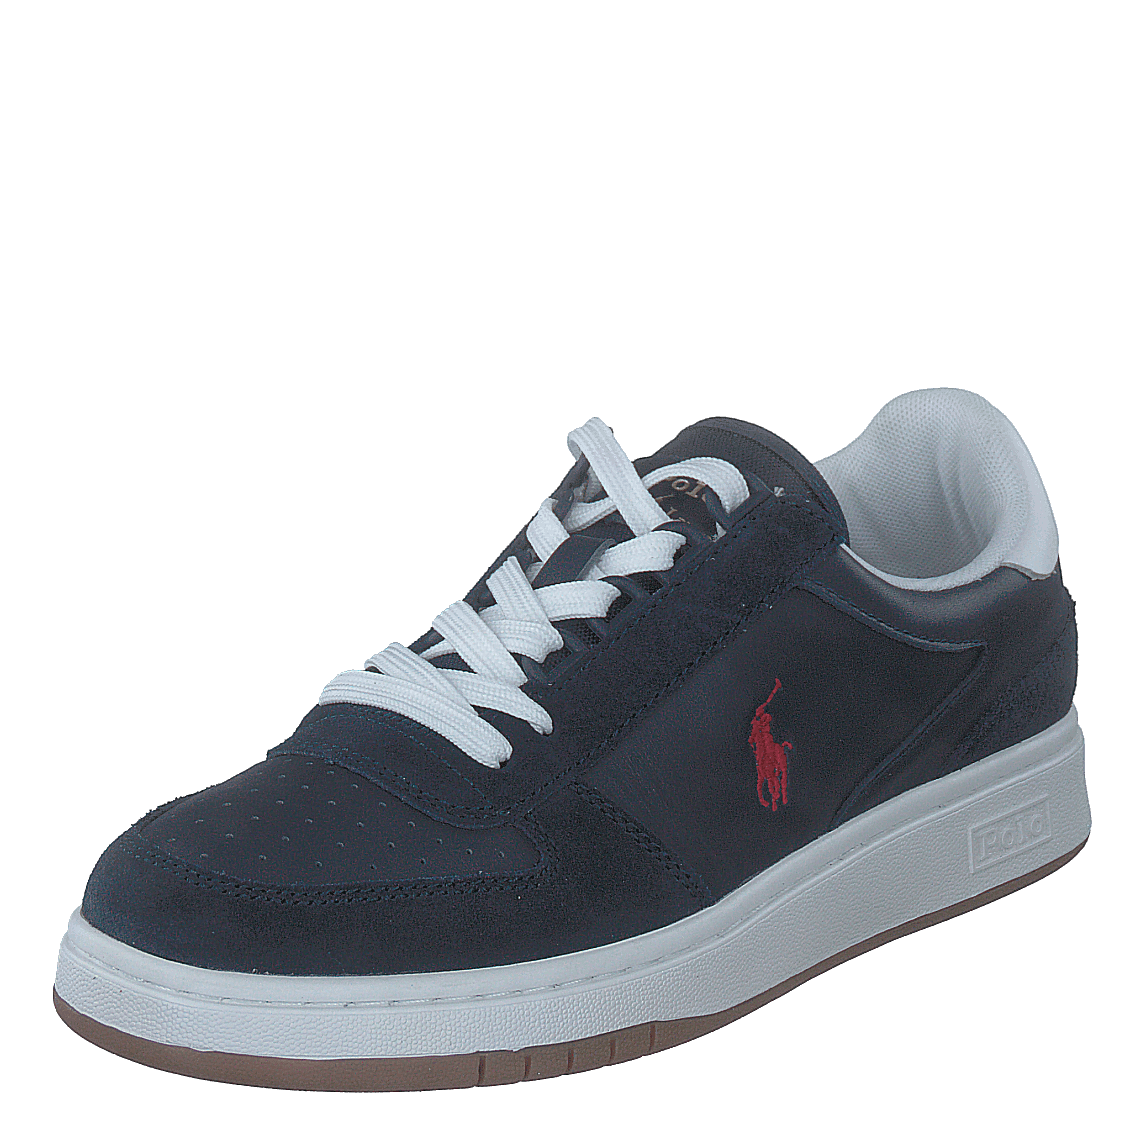 Court Leather-Suede Sneaker Newport Navy / RL2000 Red PP